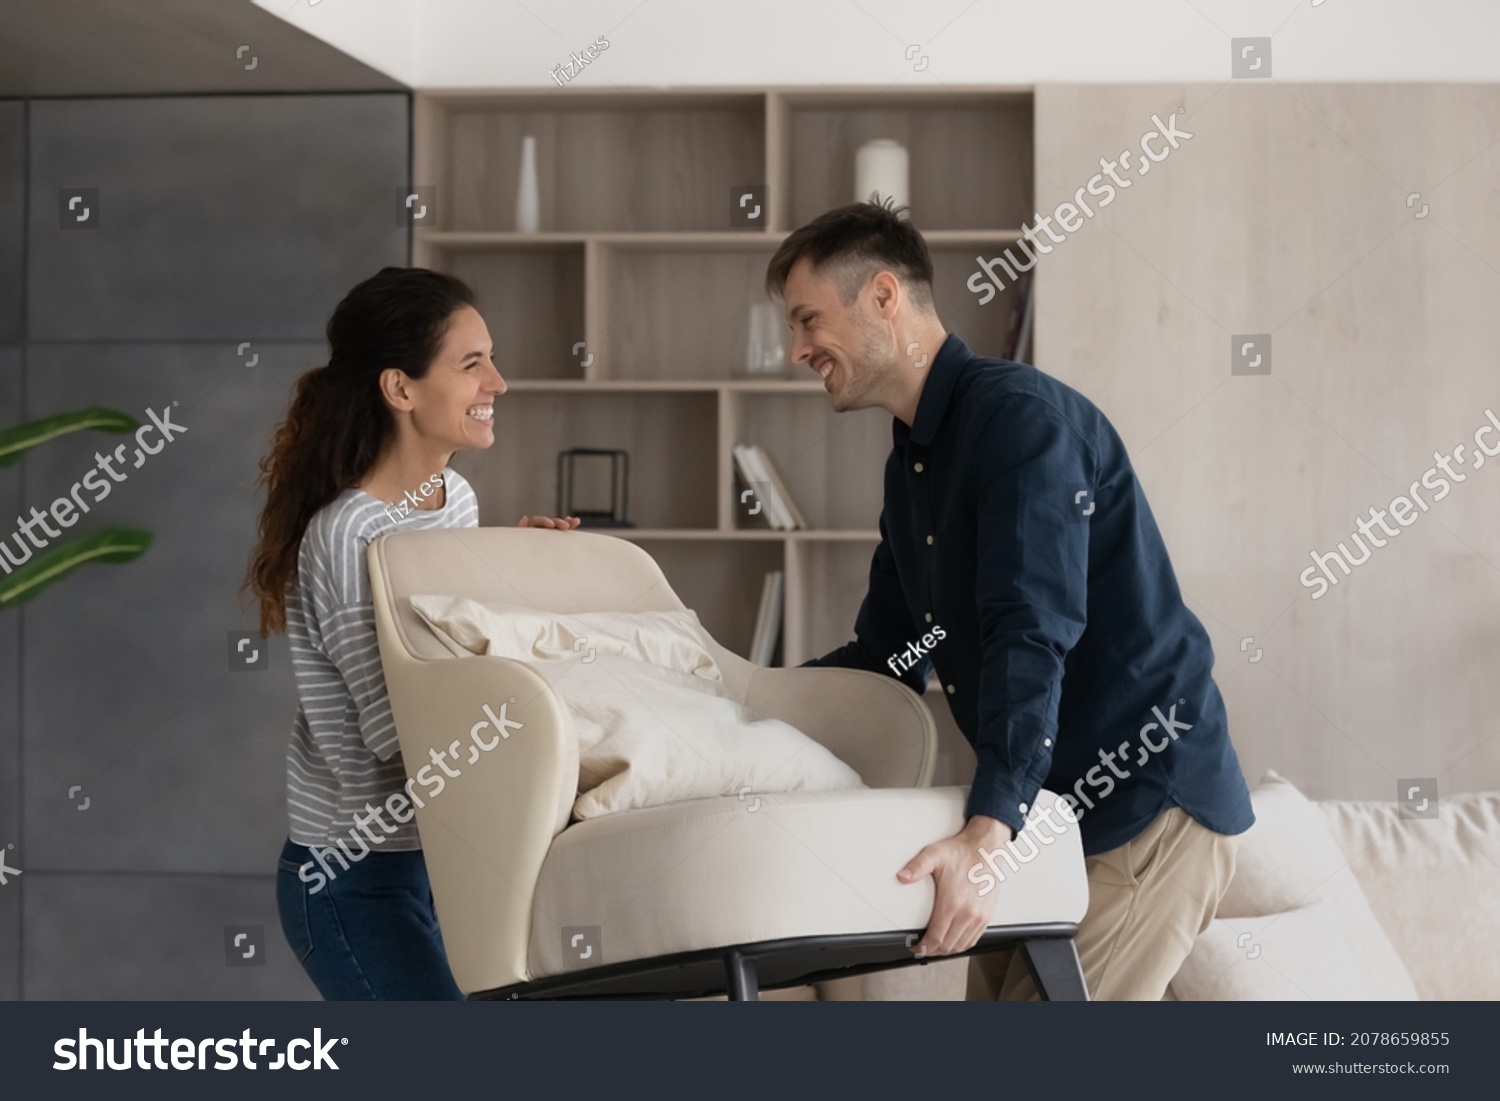 Moving day, happy buyers of fashionable furniture, bank mortgage concept. Smiling loving millennial wife and husband carry new armchair into living room, making home design improvements feel satisfied #2078659855